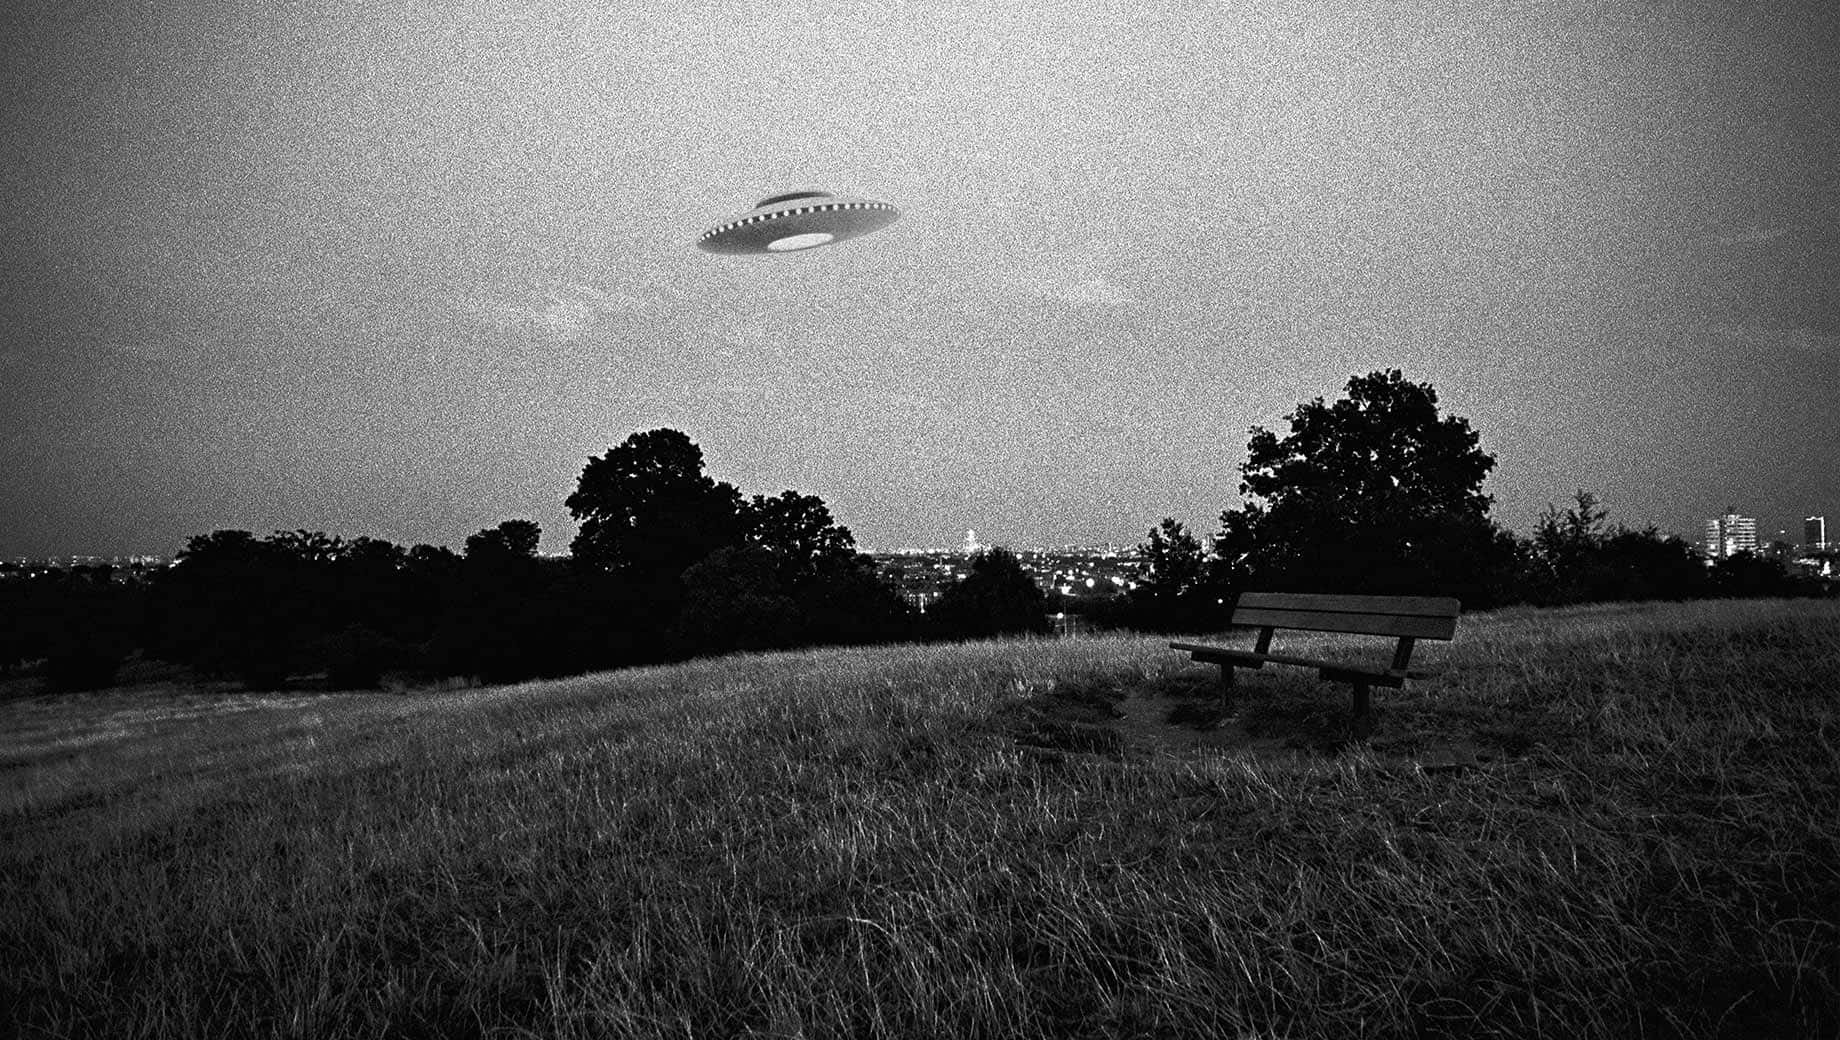 Real UFO Above Field And Forest Black And White Picture